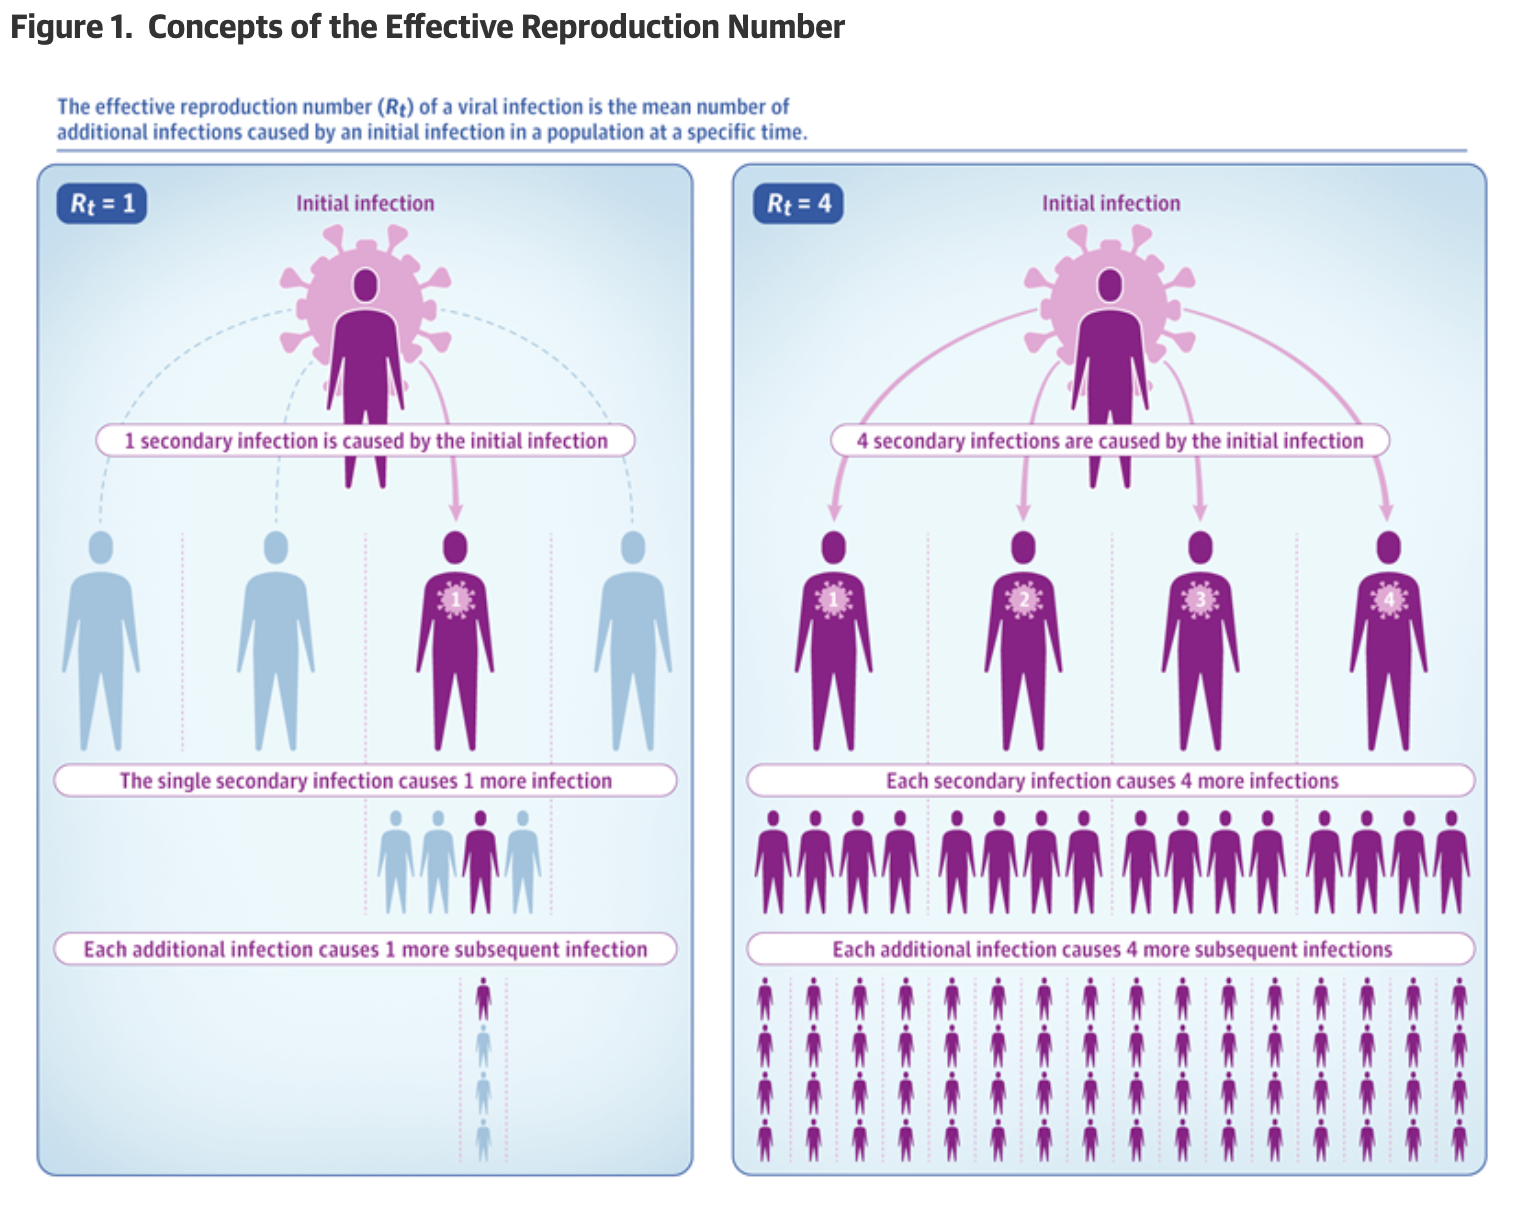 https://smart119.biz/covid-19/images/Public_Health_Measures_and_the_Reproduction_Number_of_SARS-CoV-2___Infectious_Diseases___JAMA___JAMA_Network.png